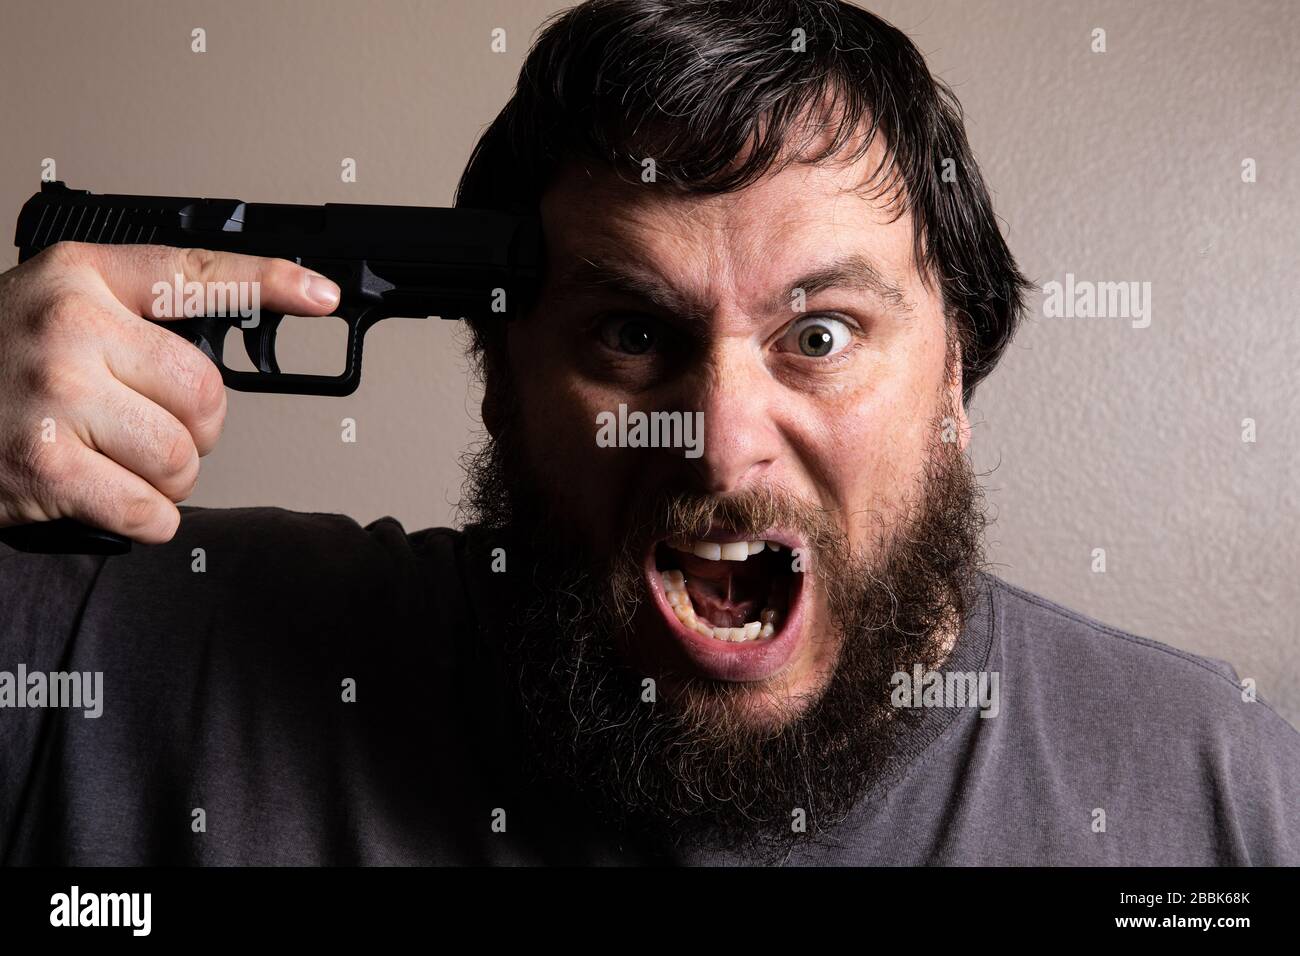 Desperate man screams before comitting suicide by pulling the trigger Stock Photo